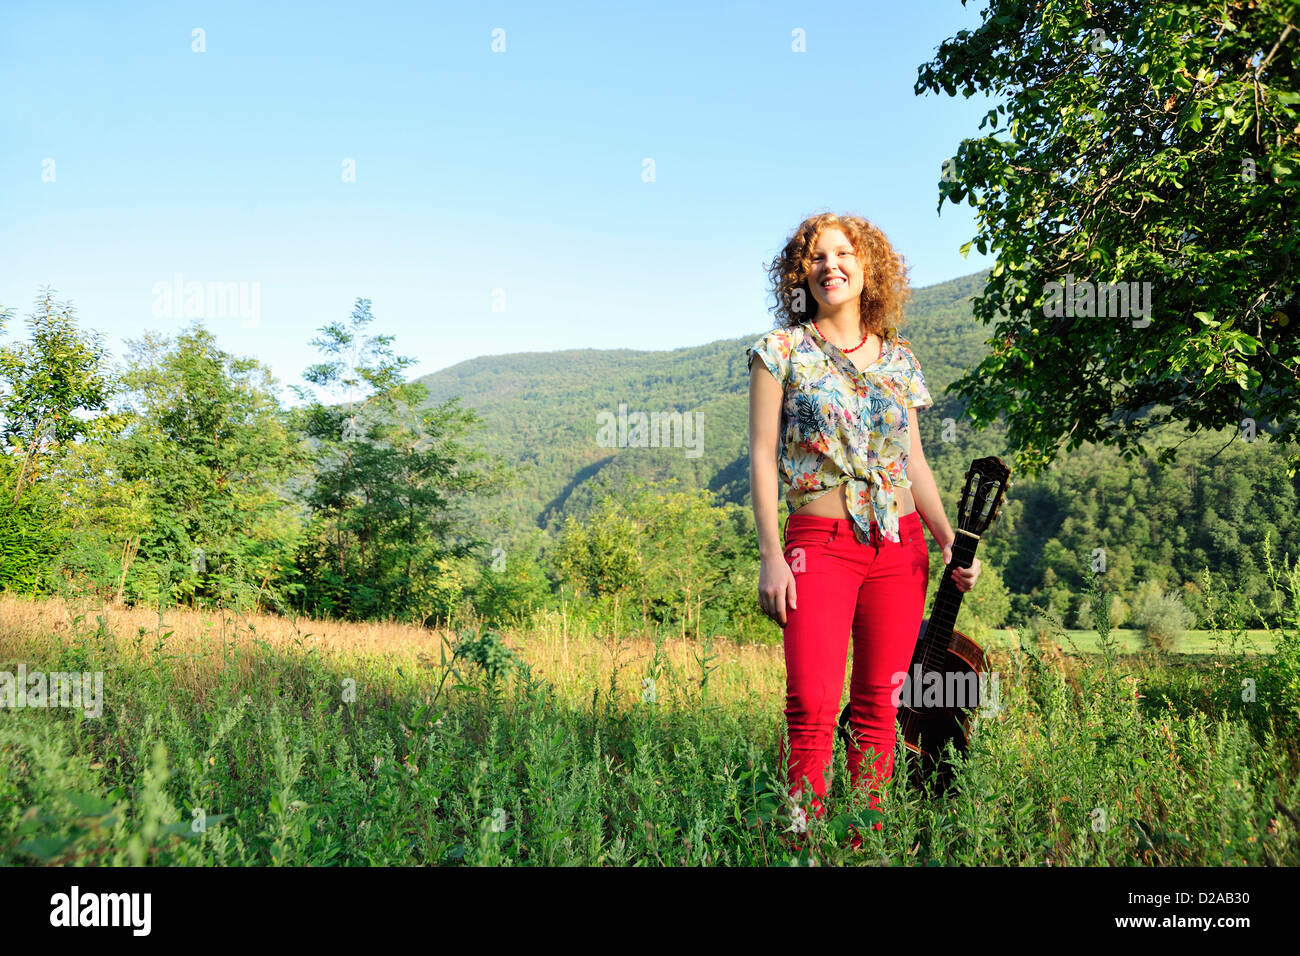 Woman holding guitar in grassy field Stock Photo